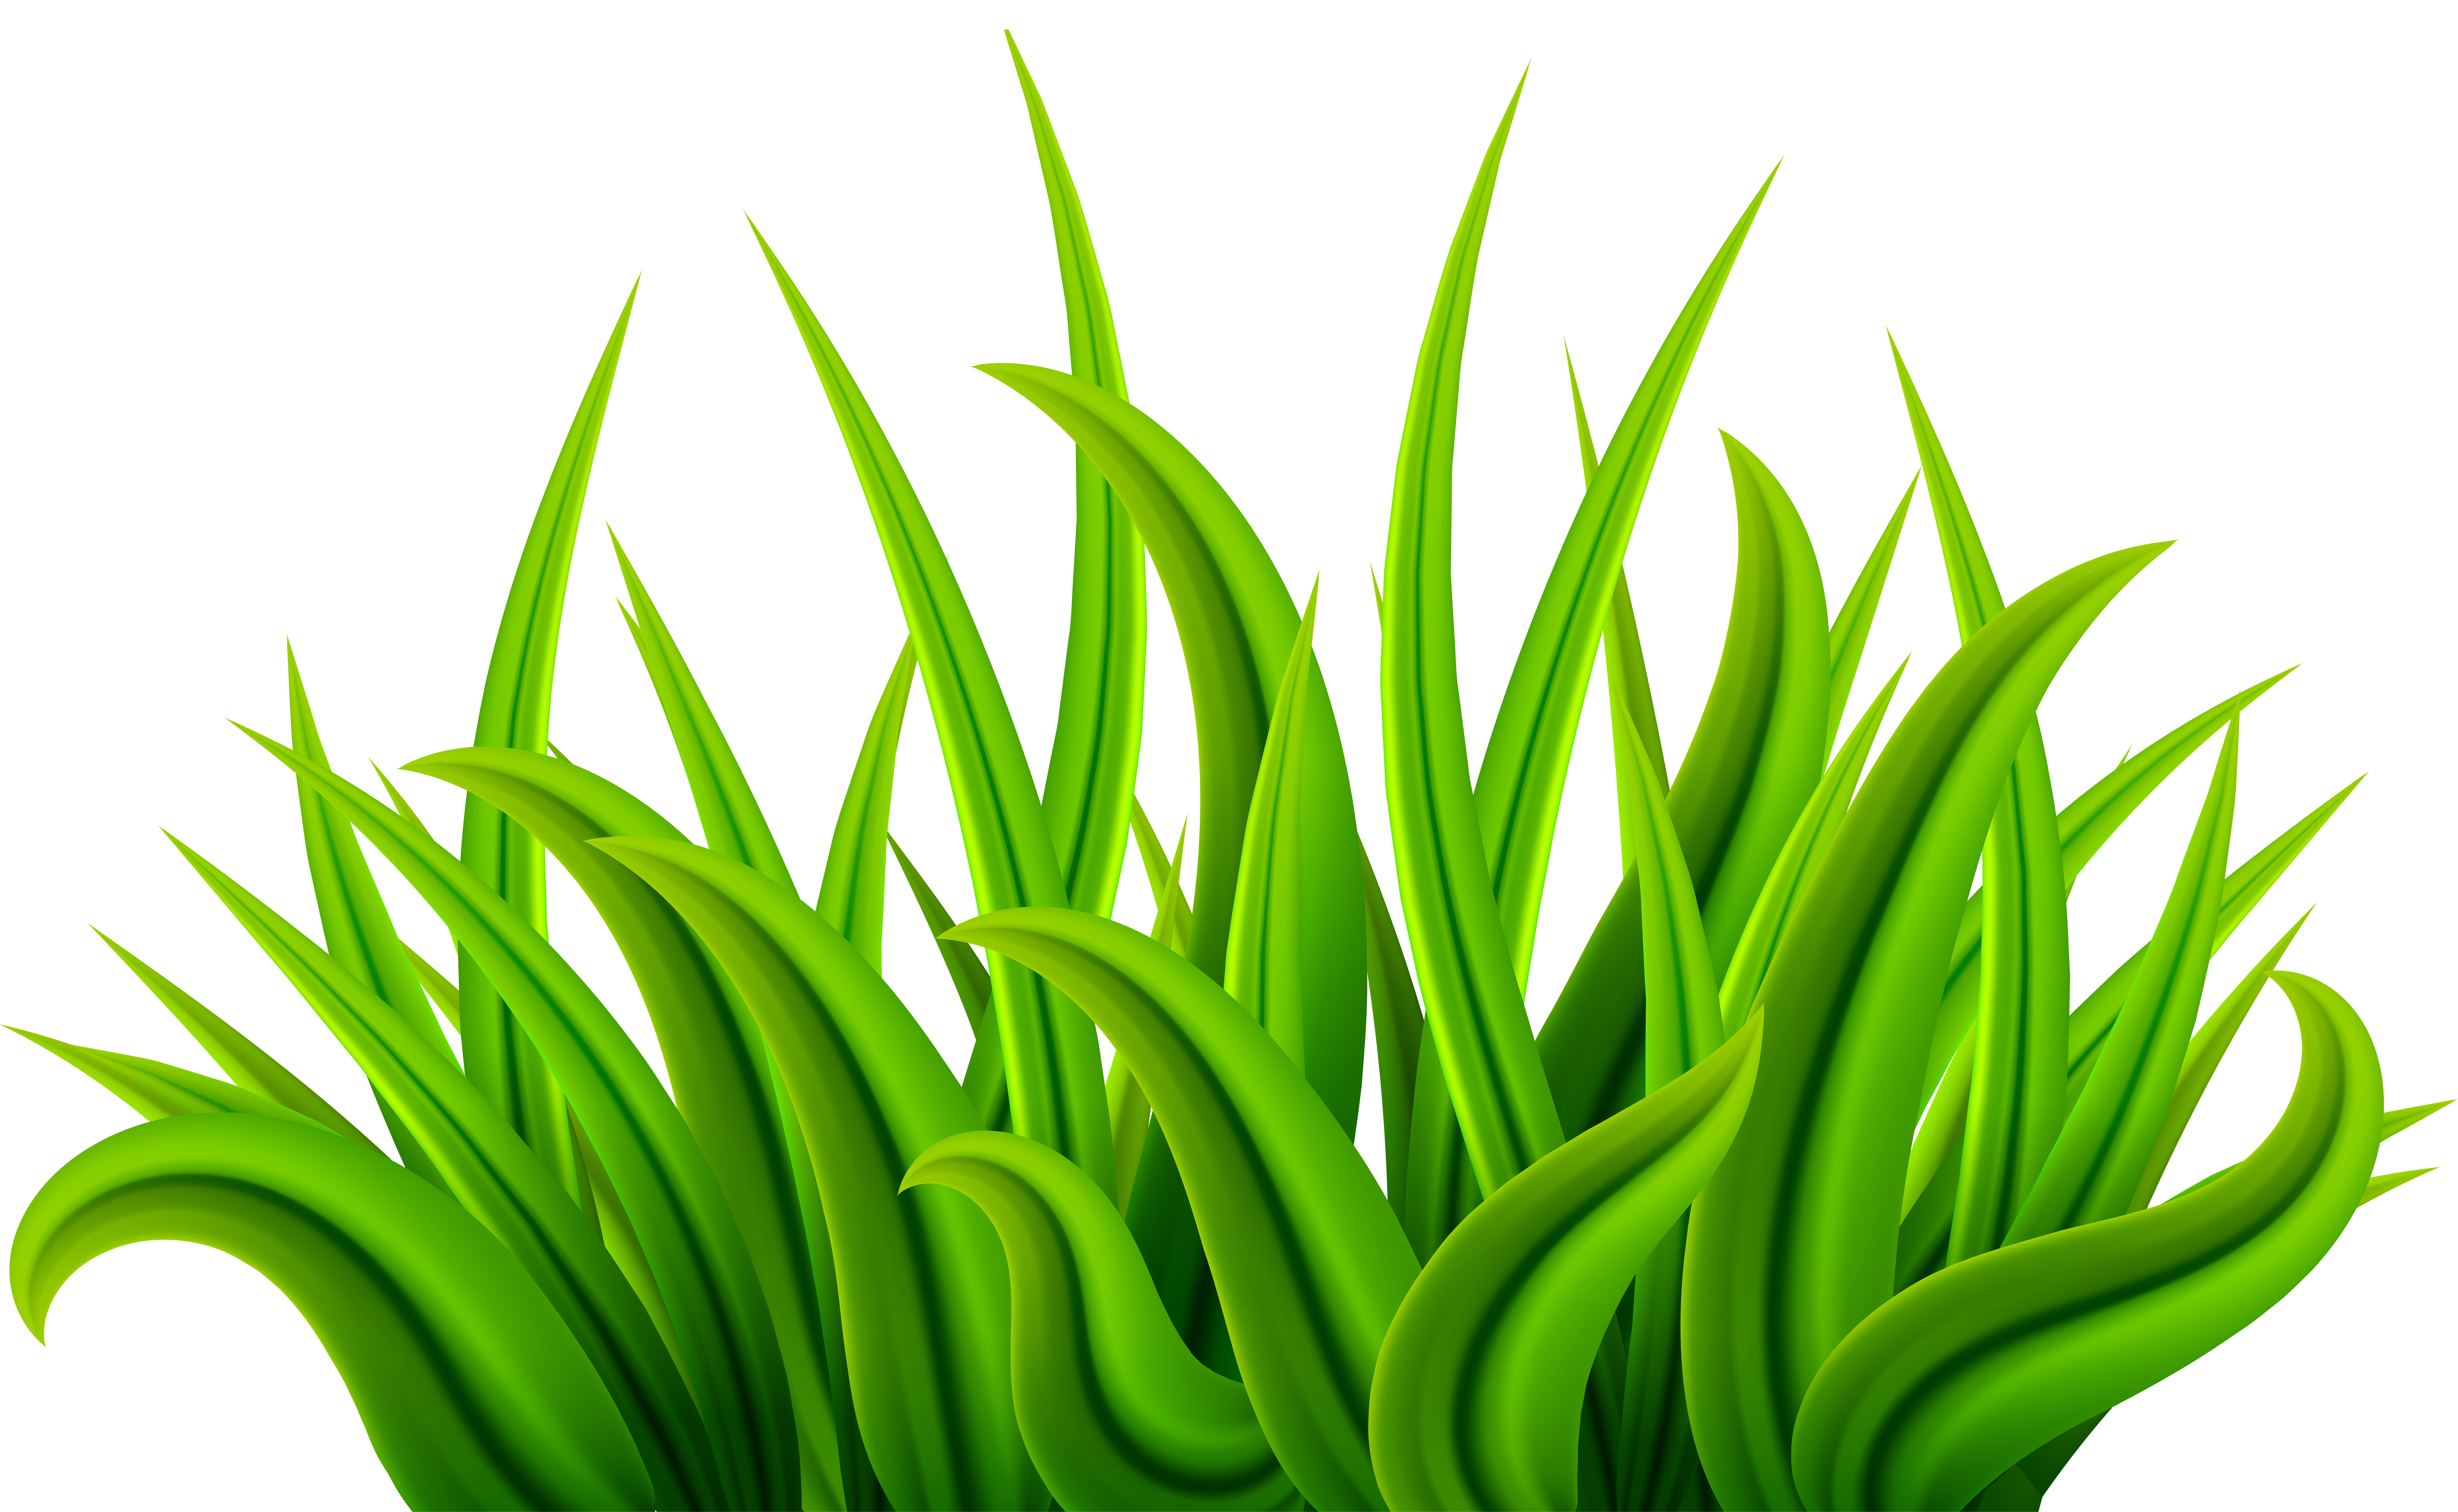 Grass clipart herbs, Grass herbs Transparent FREE for download on